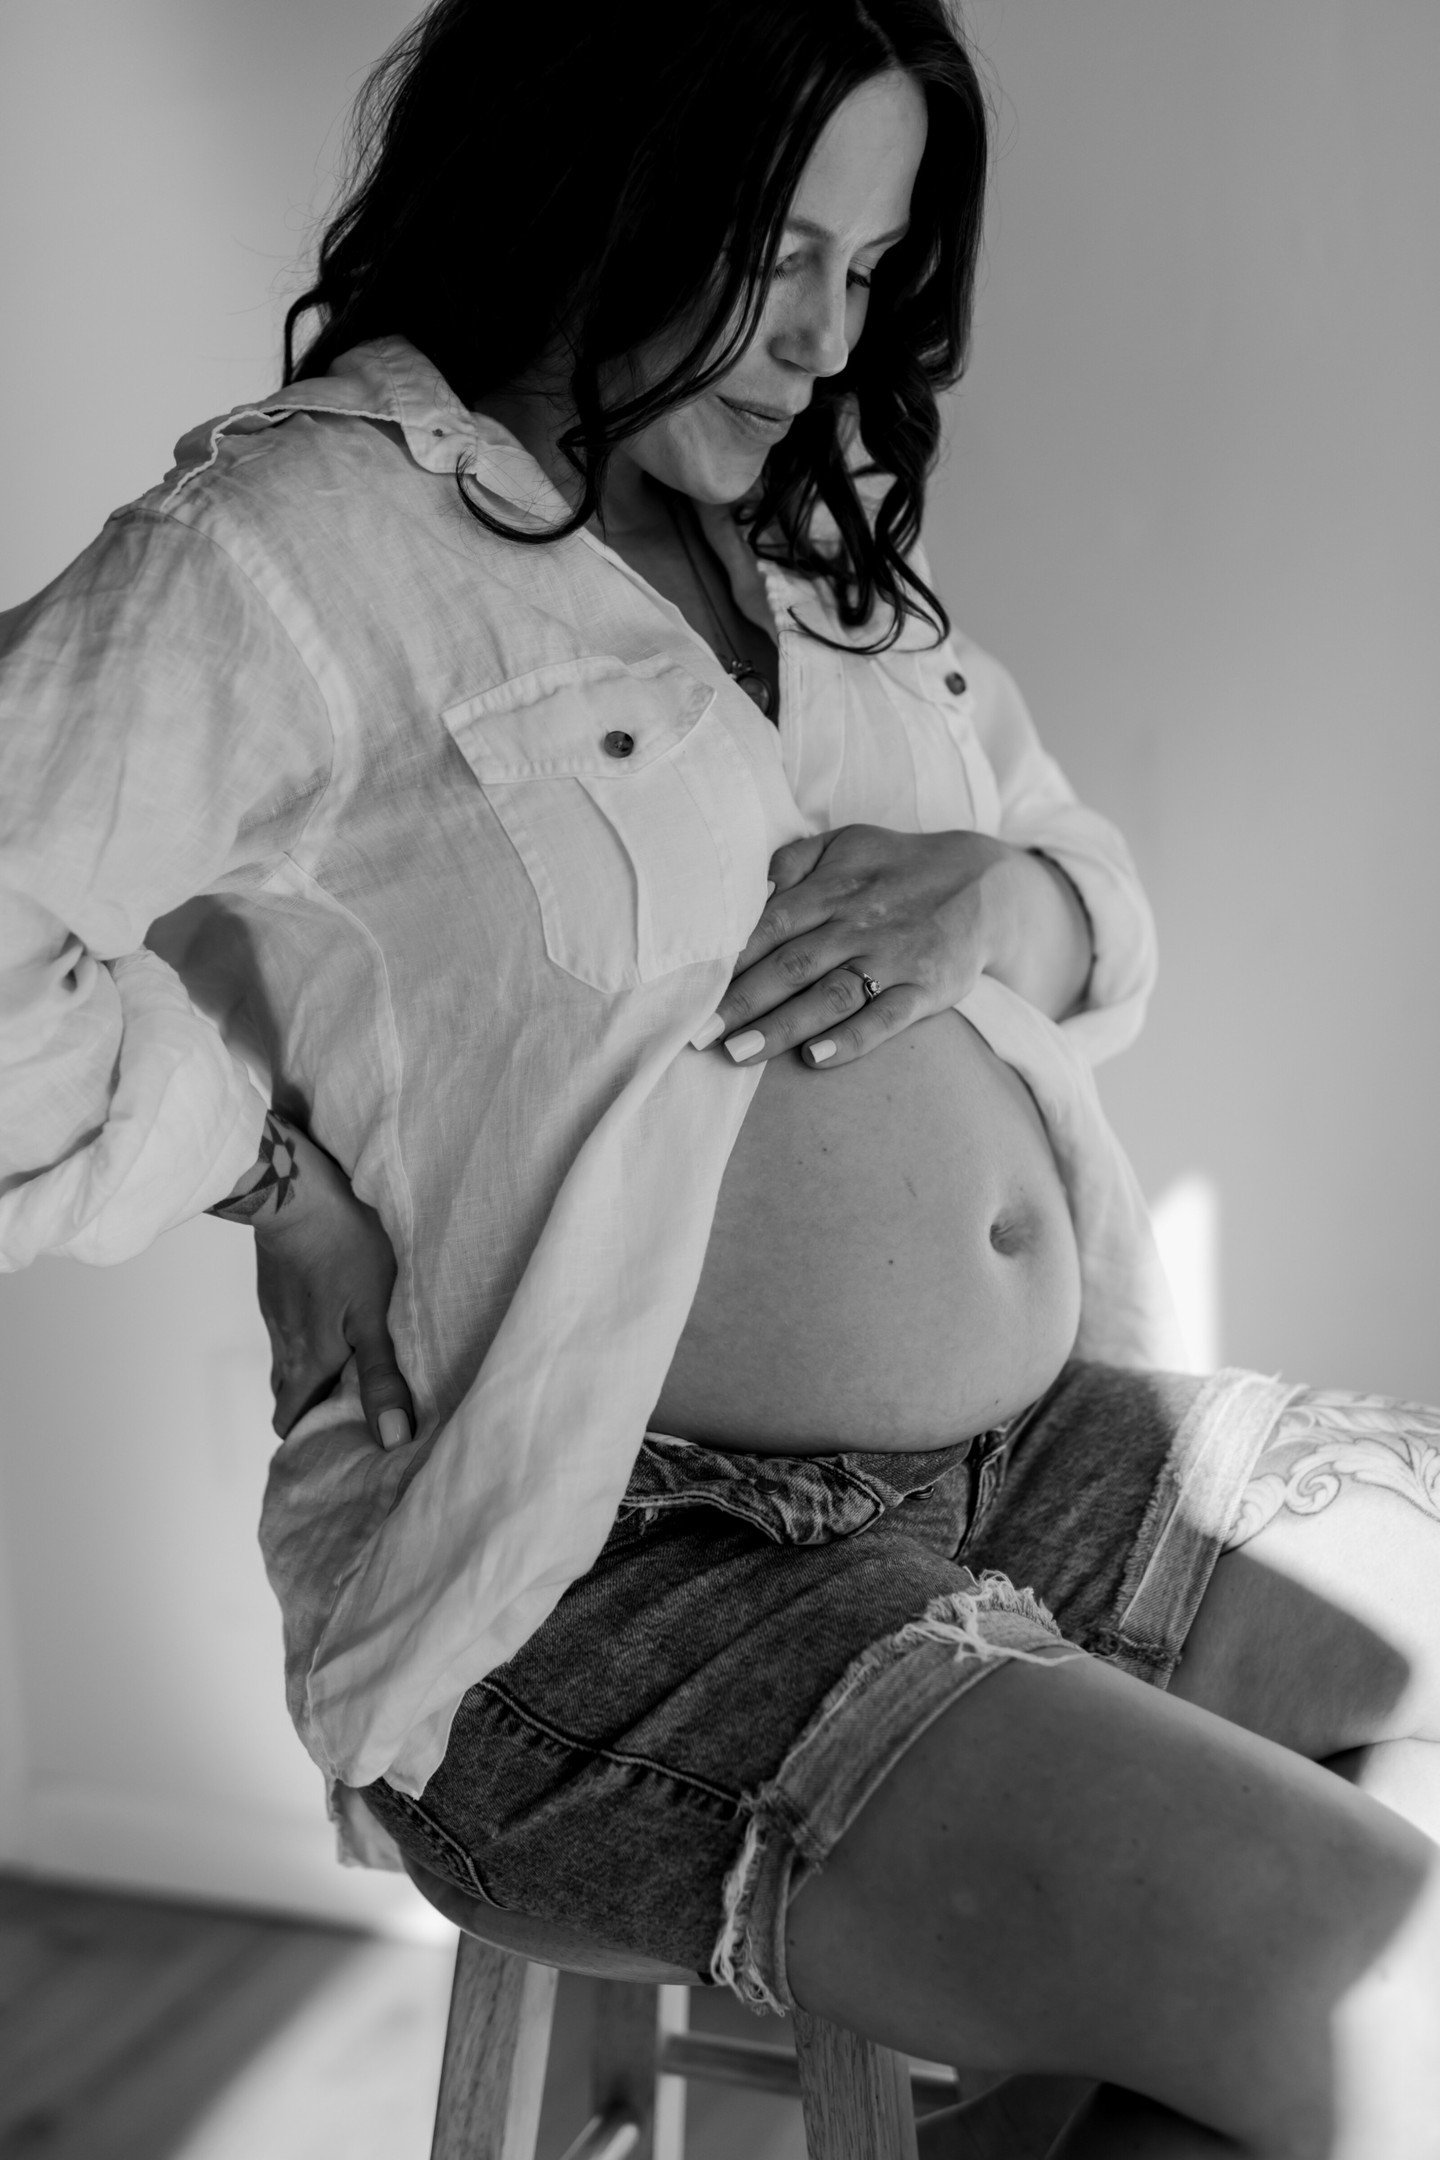 Bursting with joy? 

Bursting with baby? 

Let&rsquo;s get your picture taken!

I&rsquo;ve got a wonderful studio perfect for you to bare it all, or as much as you&rsquo;re comfortable with. 

I can catch you glowing, before baby arrives and you star